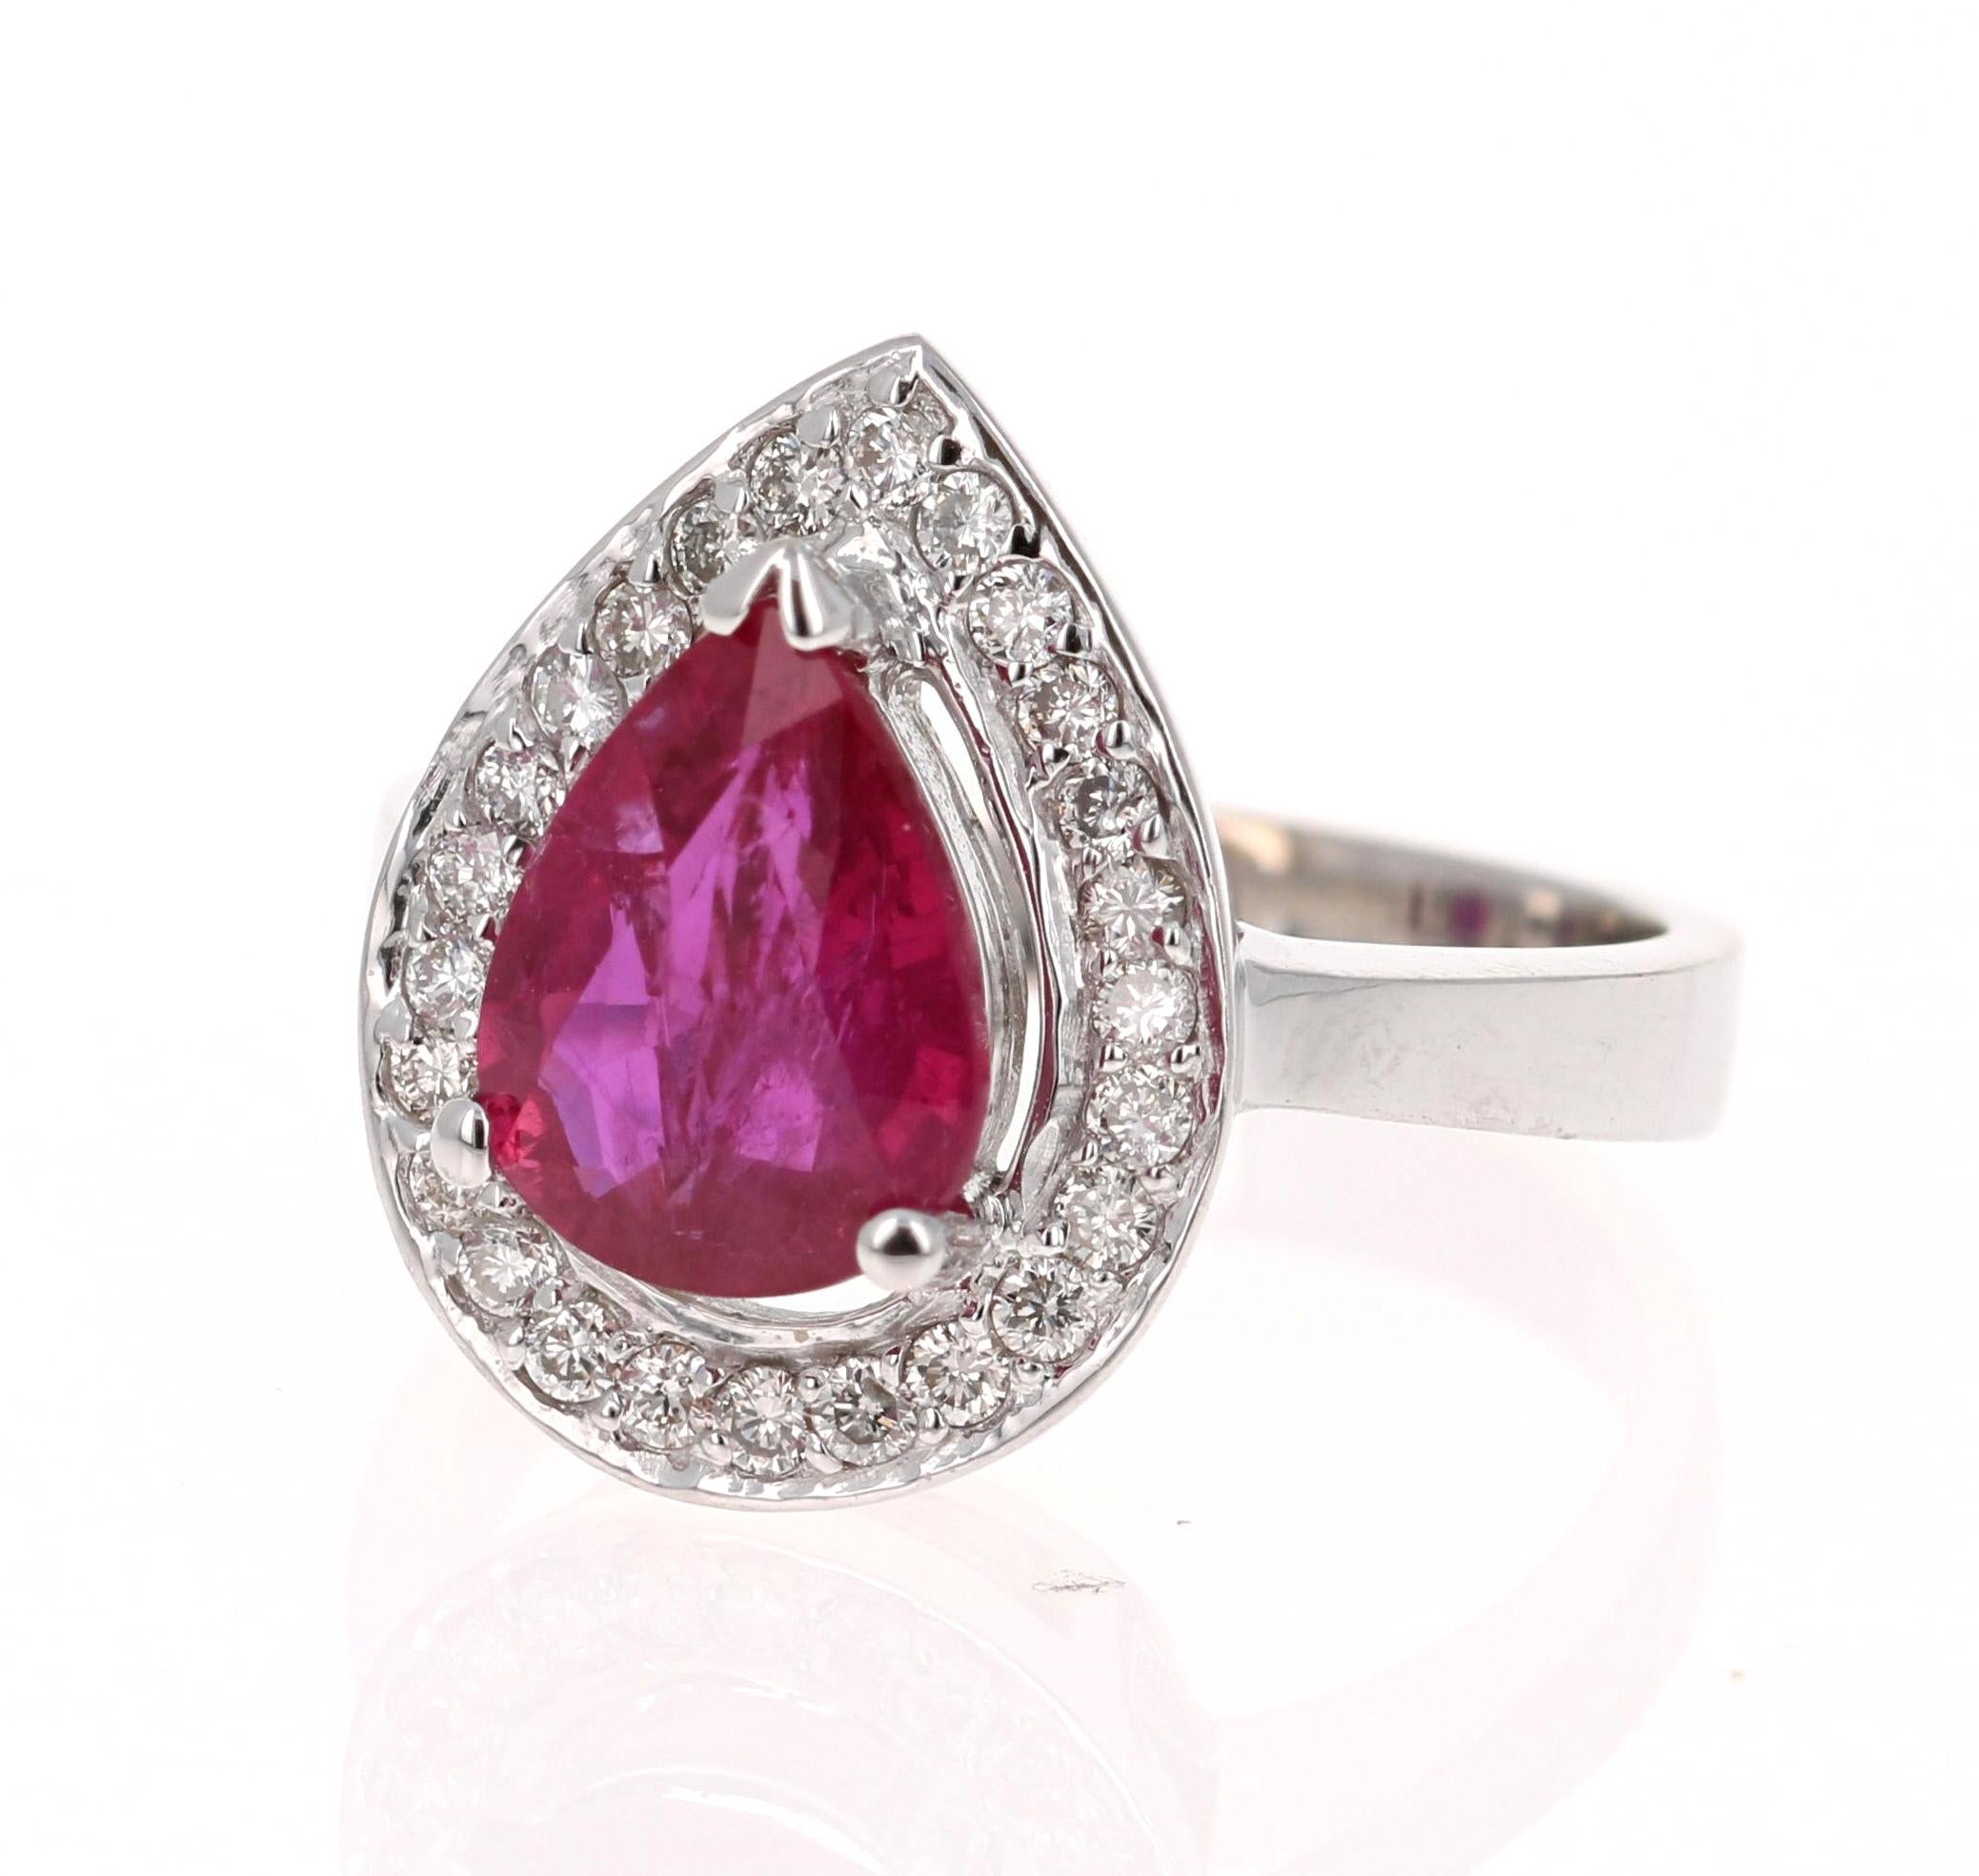 
This ring has a gorgeous Pear Cut Ruby set in the center of the ring.  The Ruby has origins from Southern Africa (Republic of Mozambique) and it weighs 2.78 Carats. It has a Halo of 26 Round Cut Diamonds weighing 0.39 Carats. (Clarity: VS2, Color: